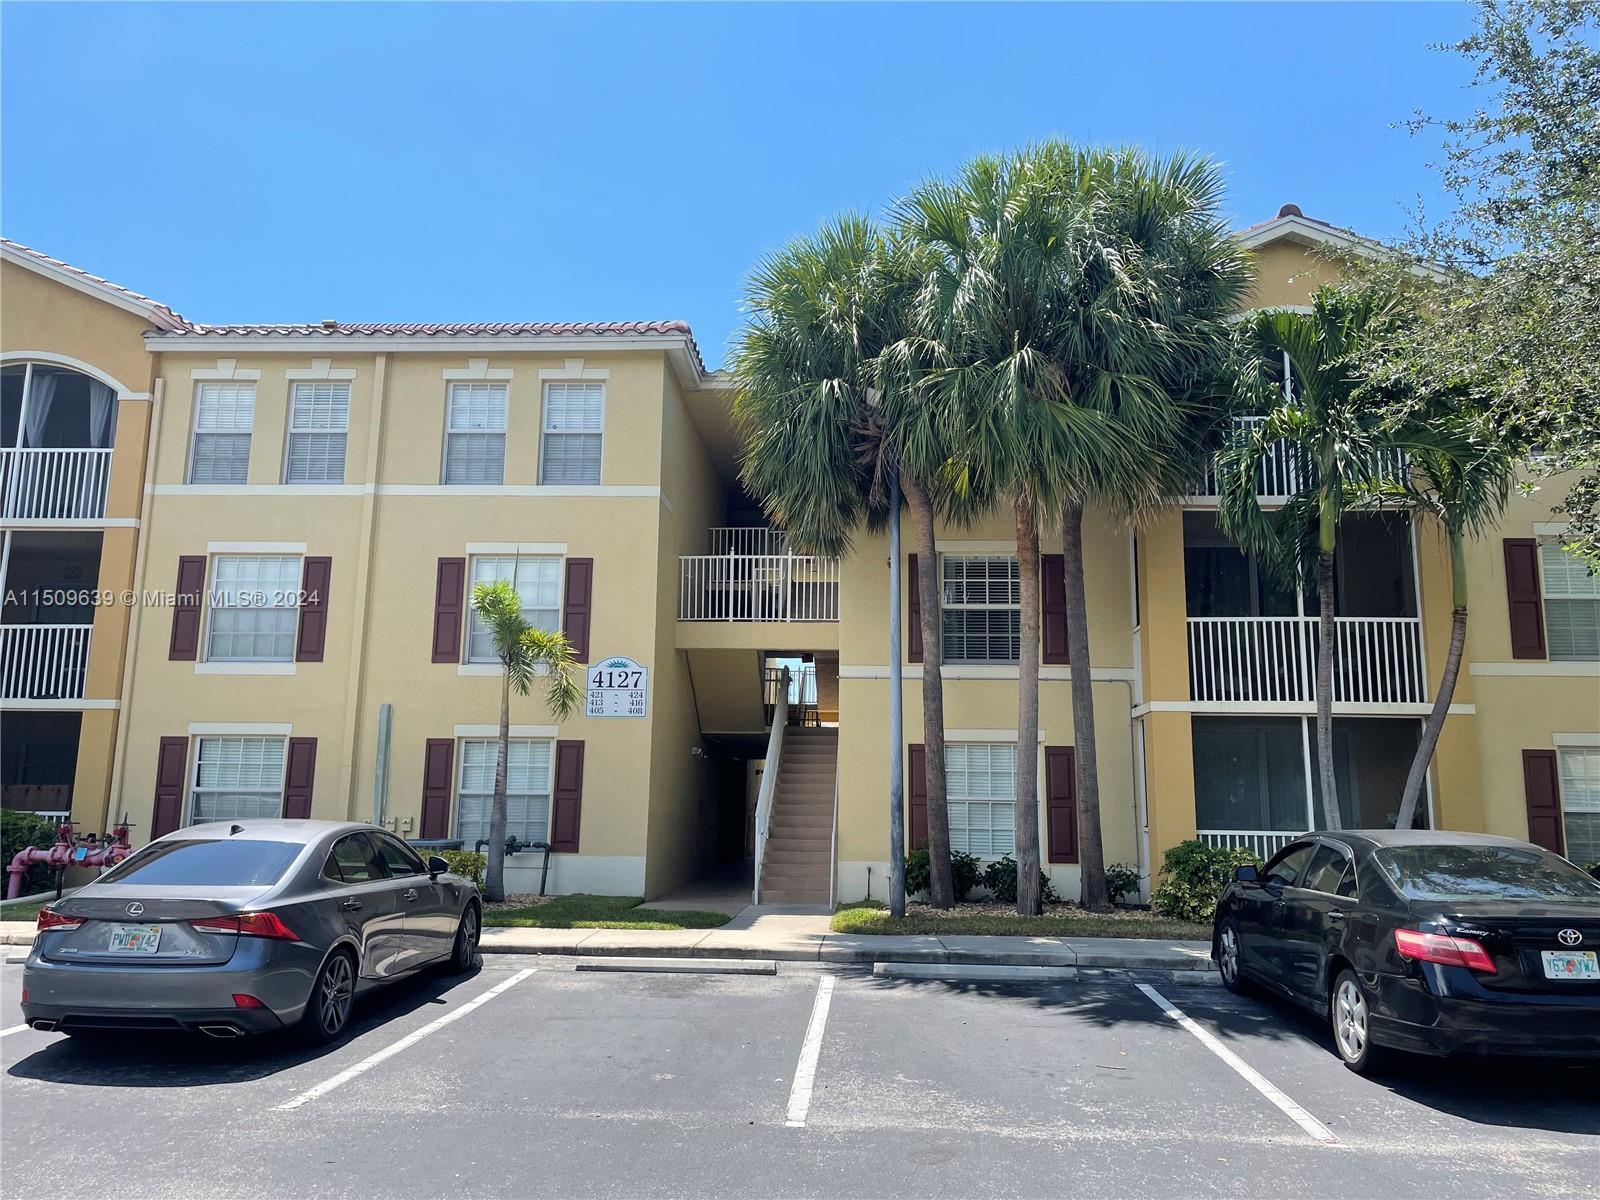 Photo of 4127 Residence Dr #408 in Fort Myers, FL